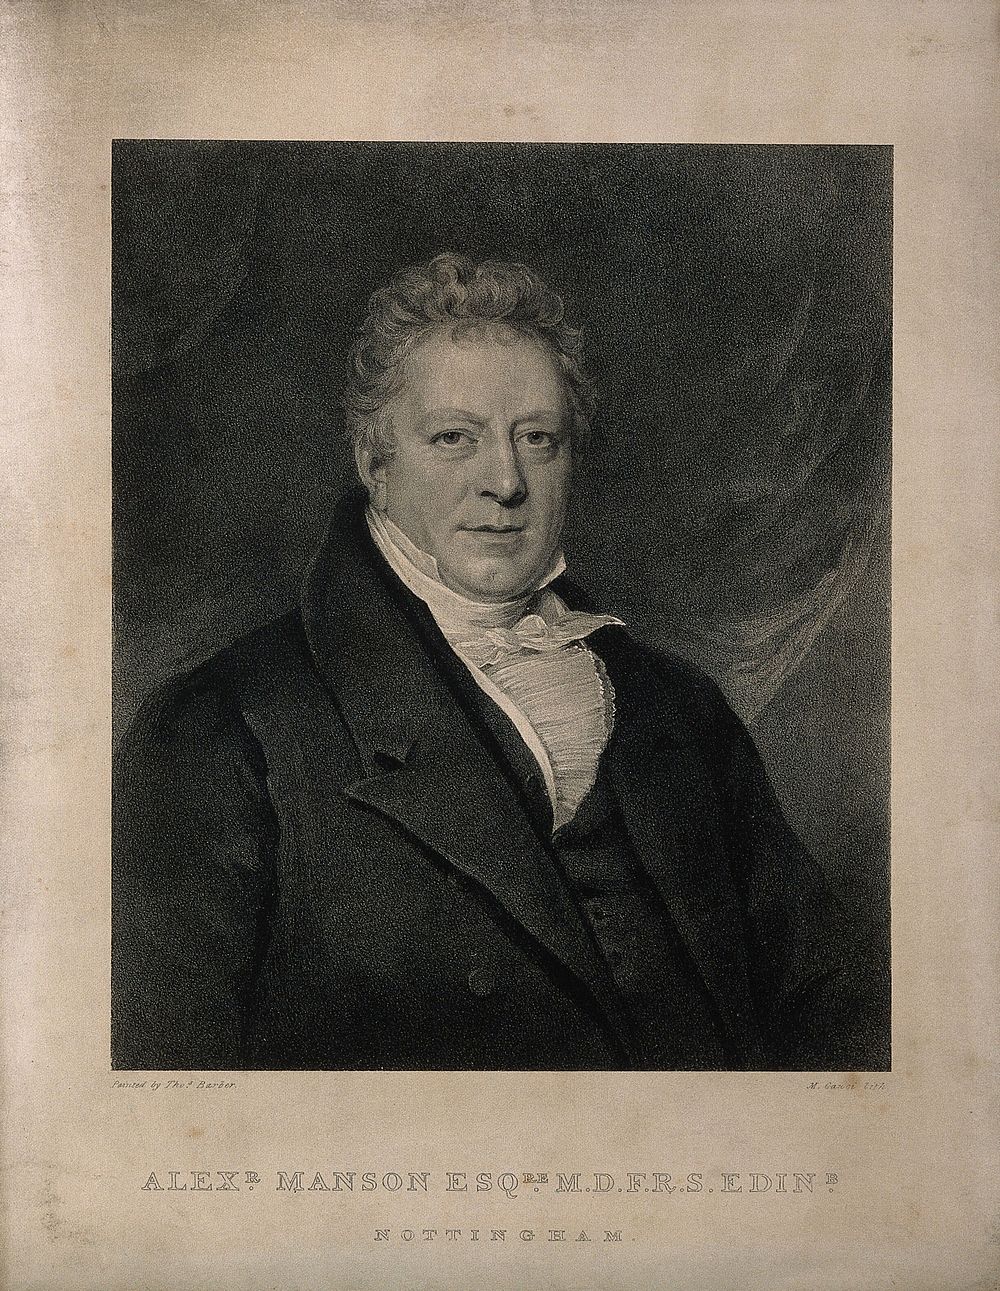 Alexander Manson. Lithograph by M. Gauci after T. Barber.